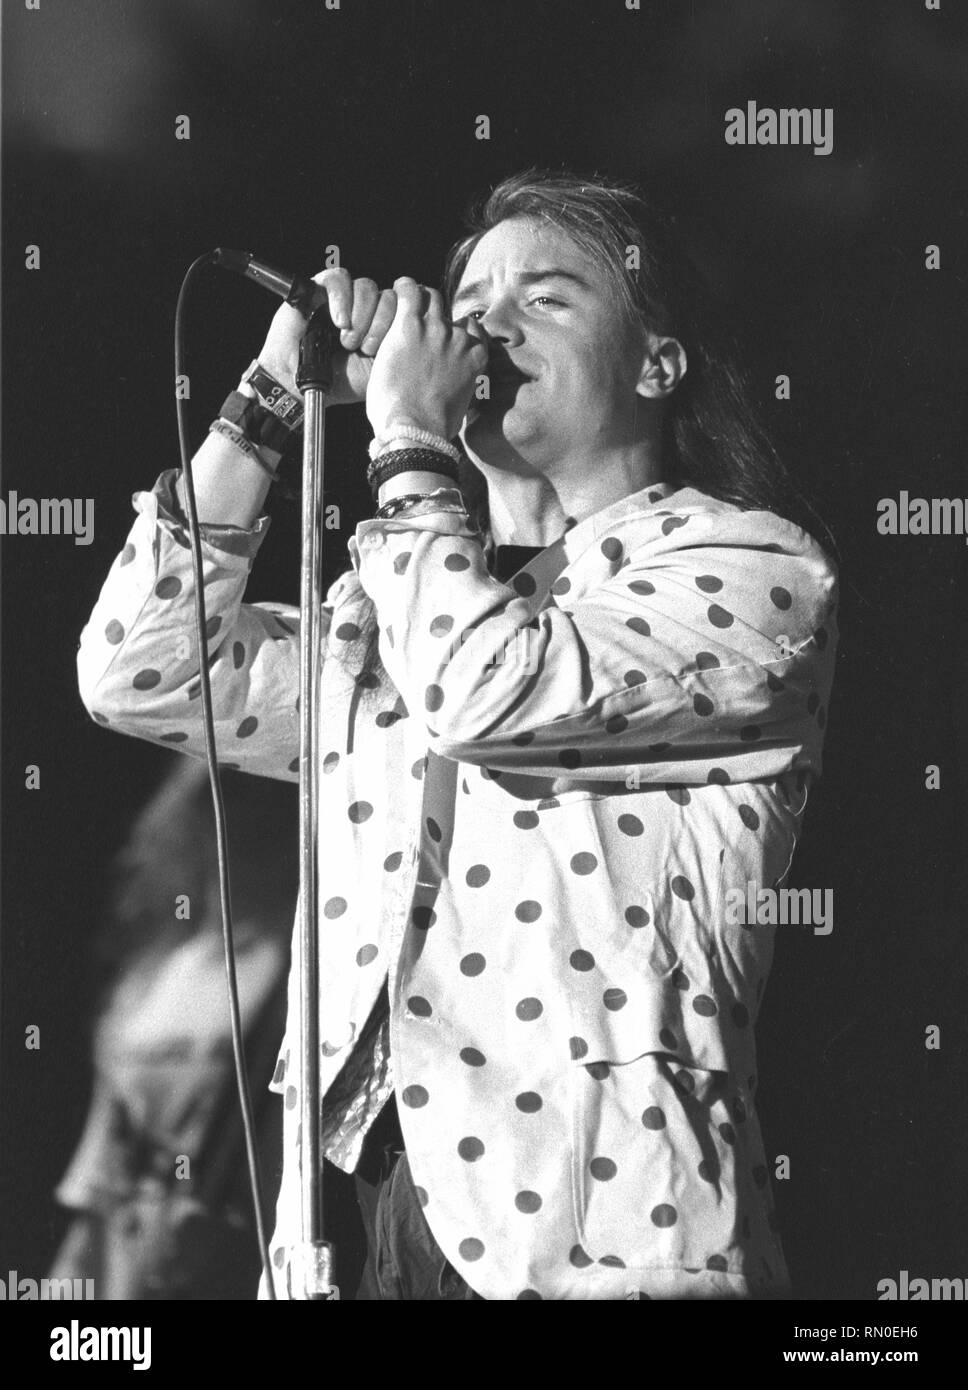 Singer Mike Patton of the alternative rock band Faith No More is shown performing on stage during a 'live' concert appearance. Stock Photo